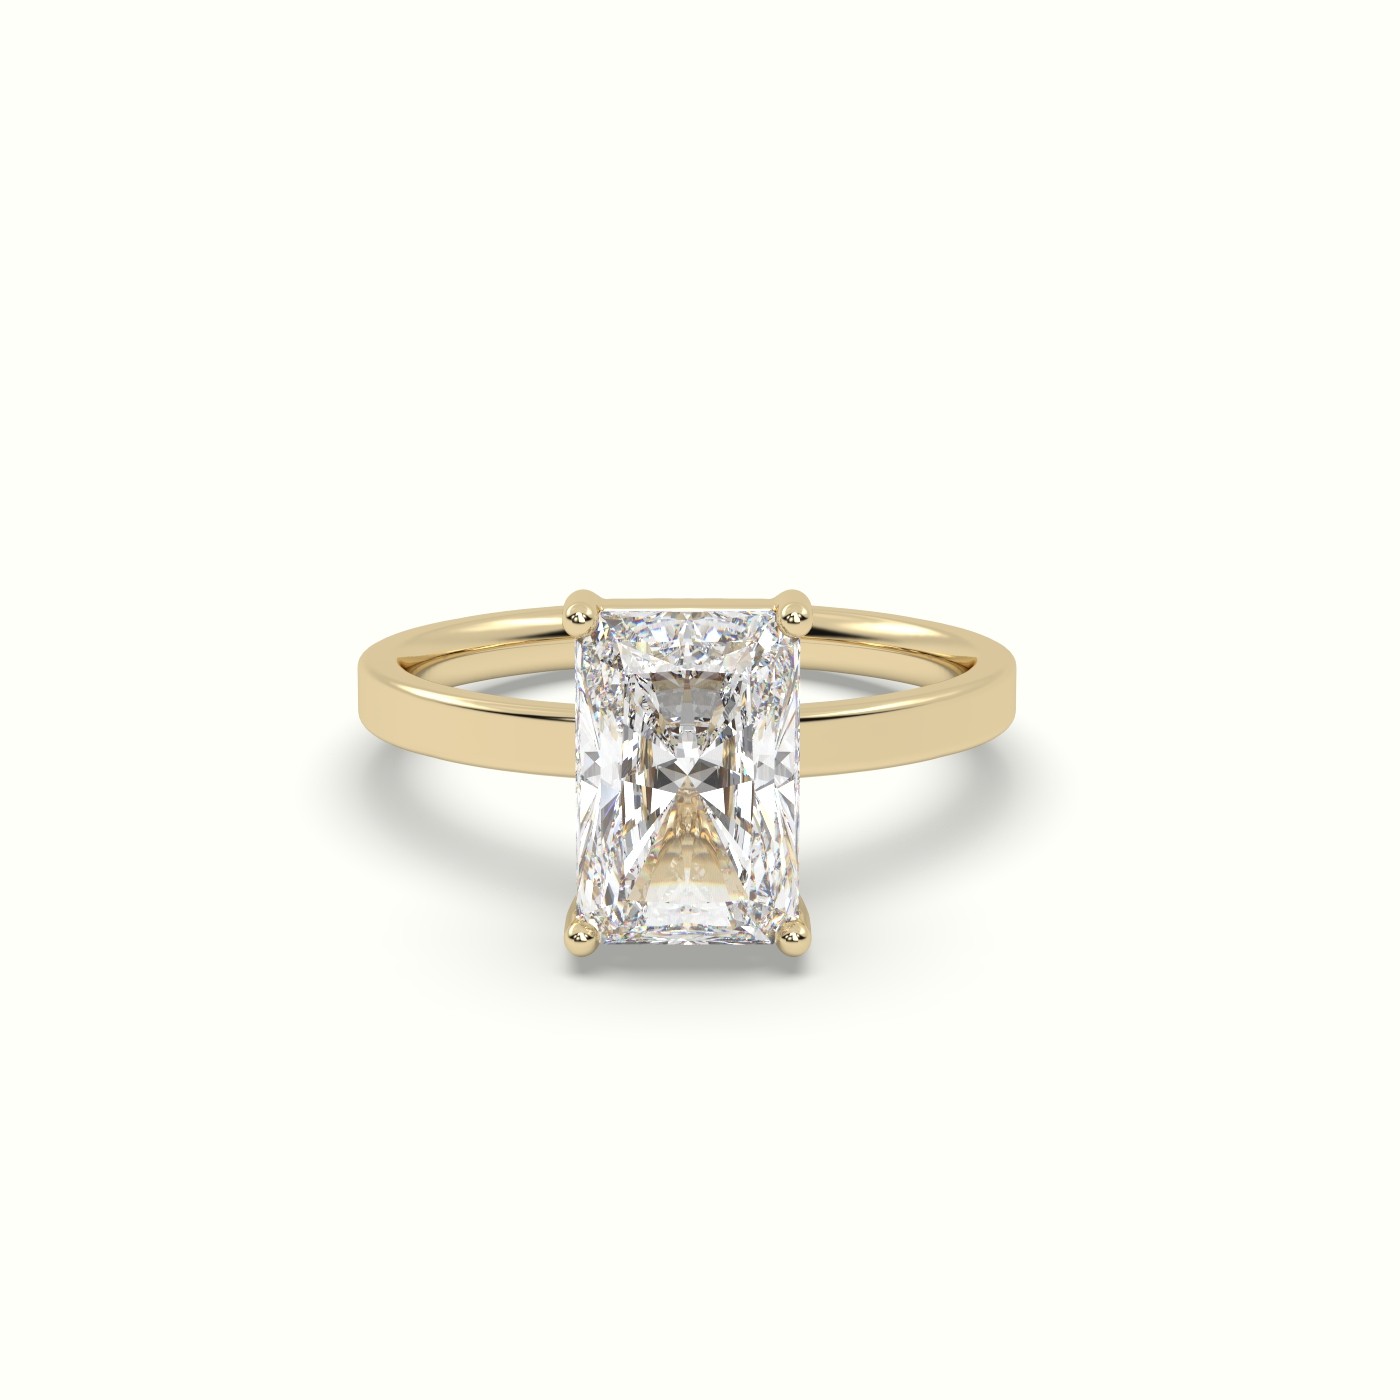 18K YELLOW GOLD Radiant Cut Solitaire Diamond Ring Precious Jewels Antwerp Radiance